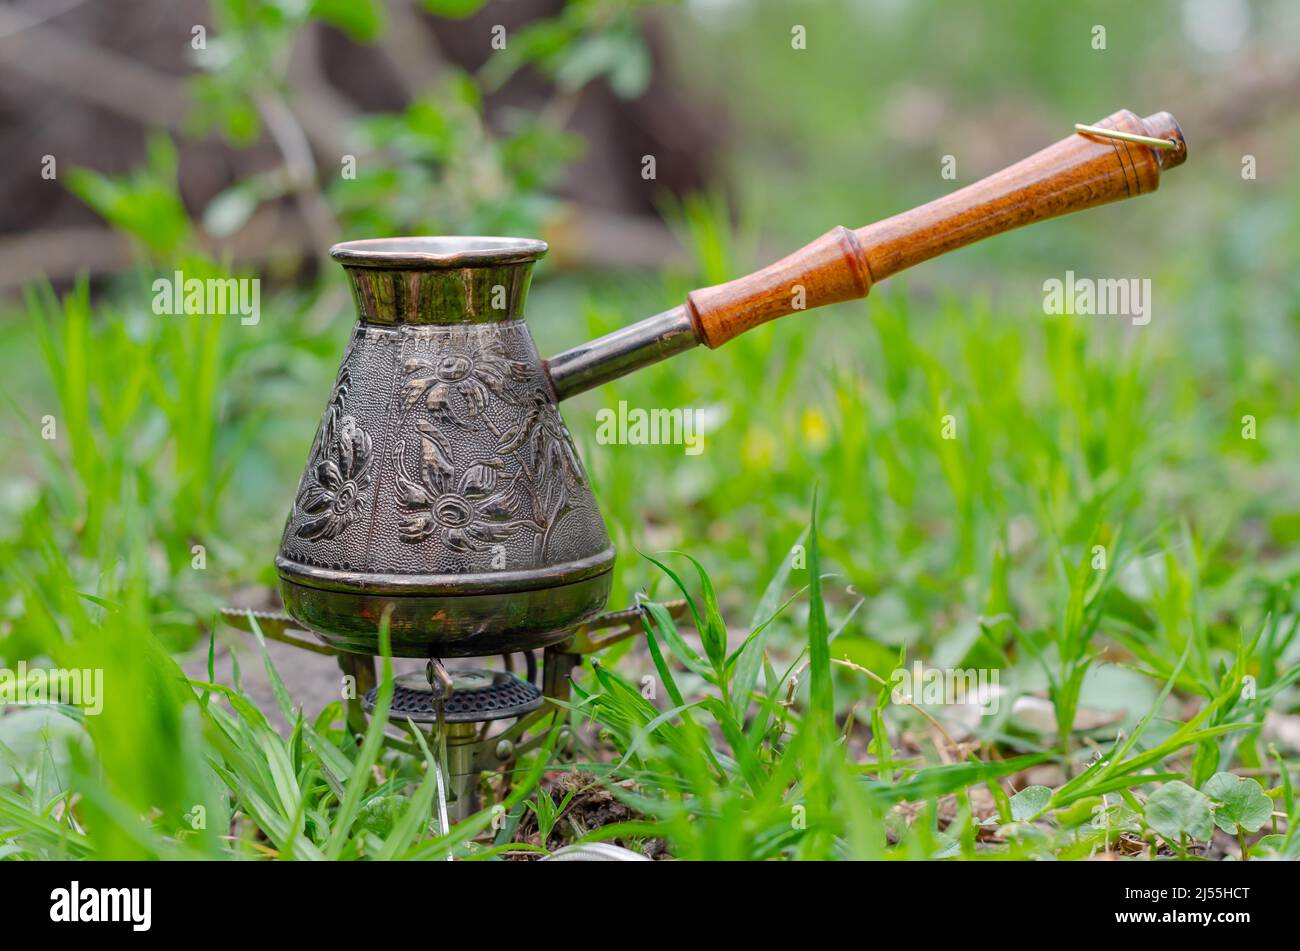 Turkish coffee on vacation in nature. Copper metal coffee maker on tourist gas burner. Delicious coffee. Stock Photo